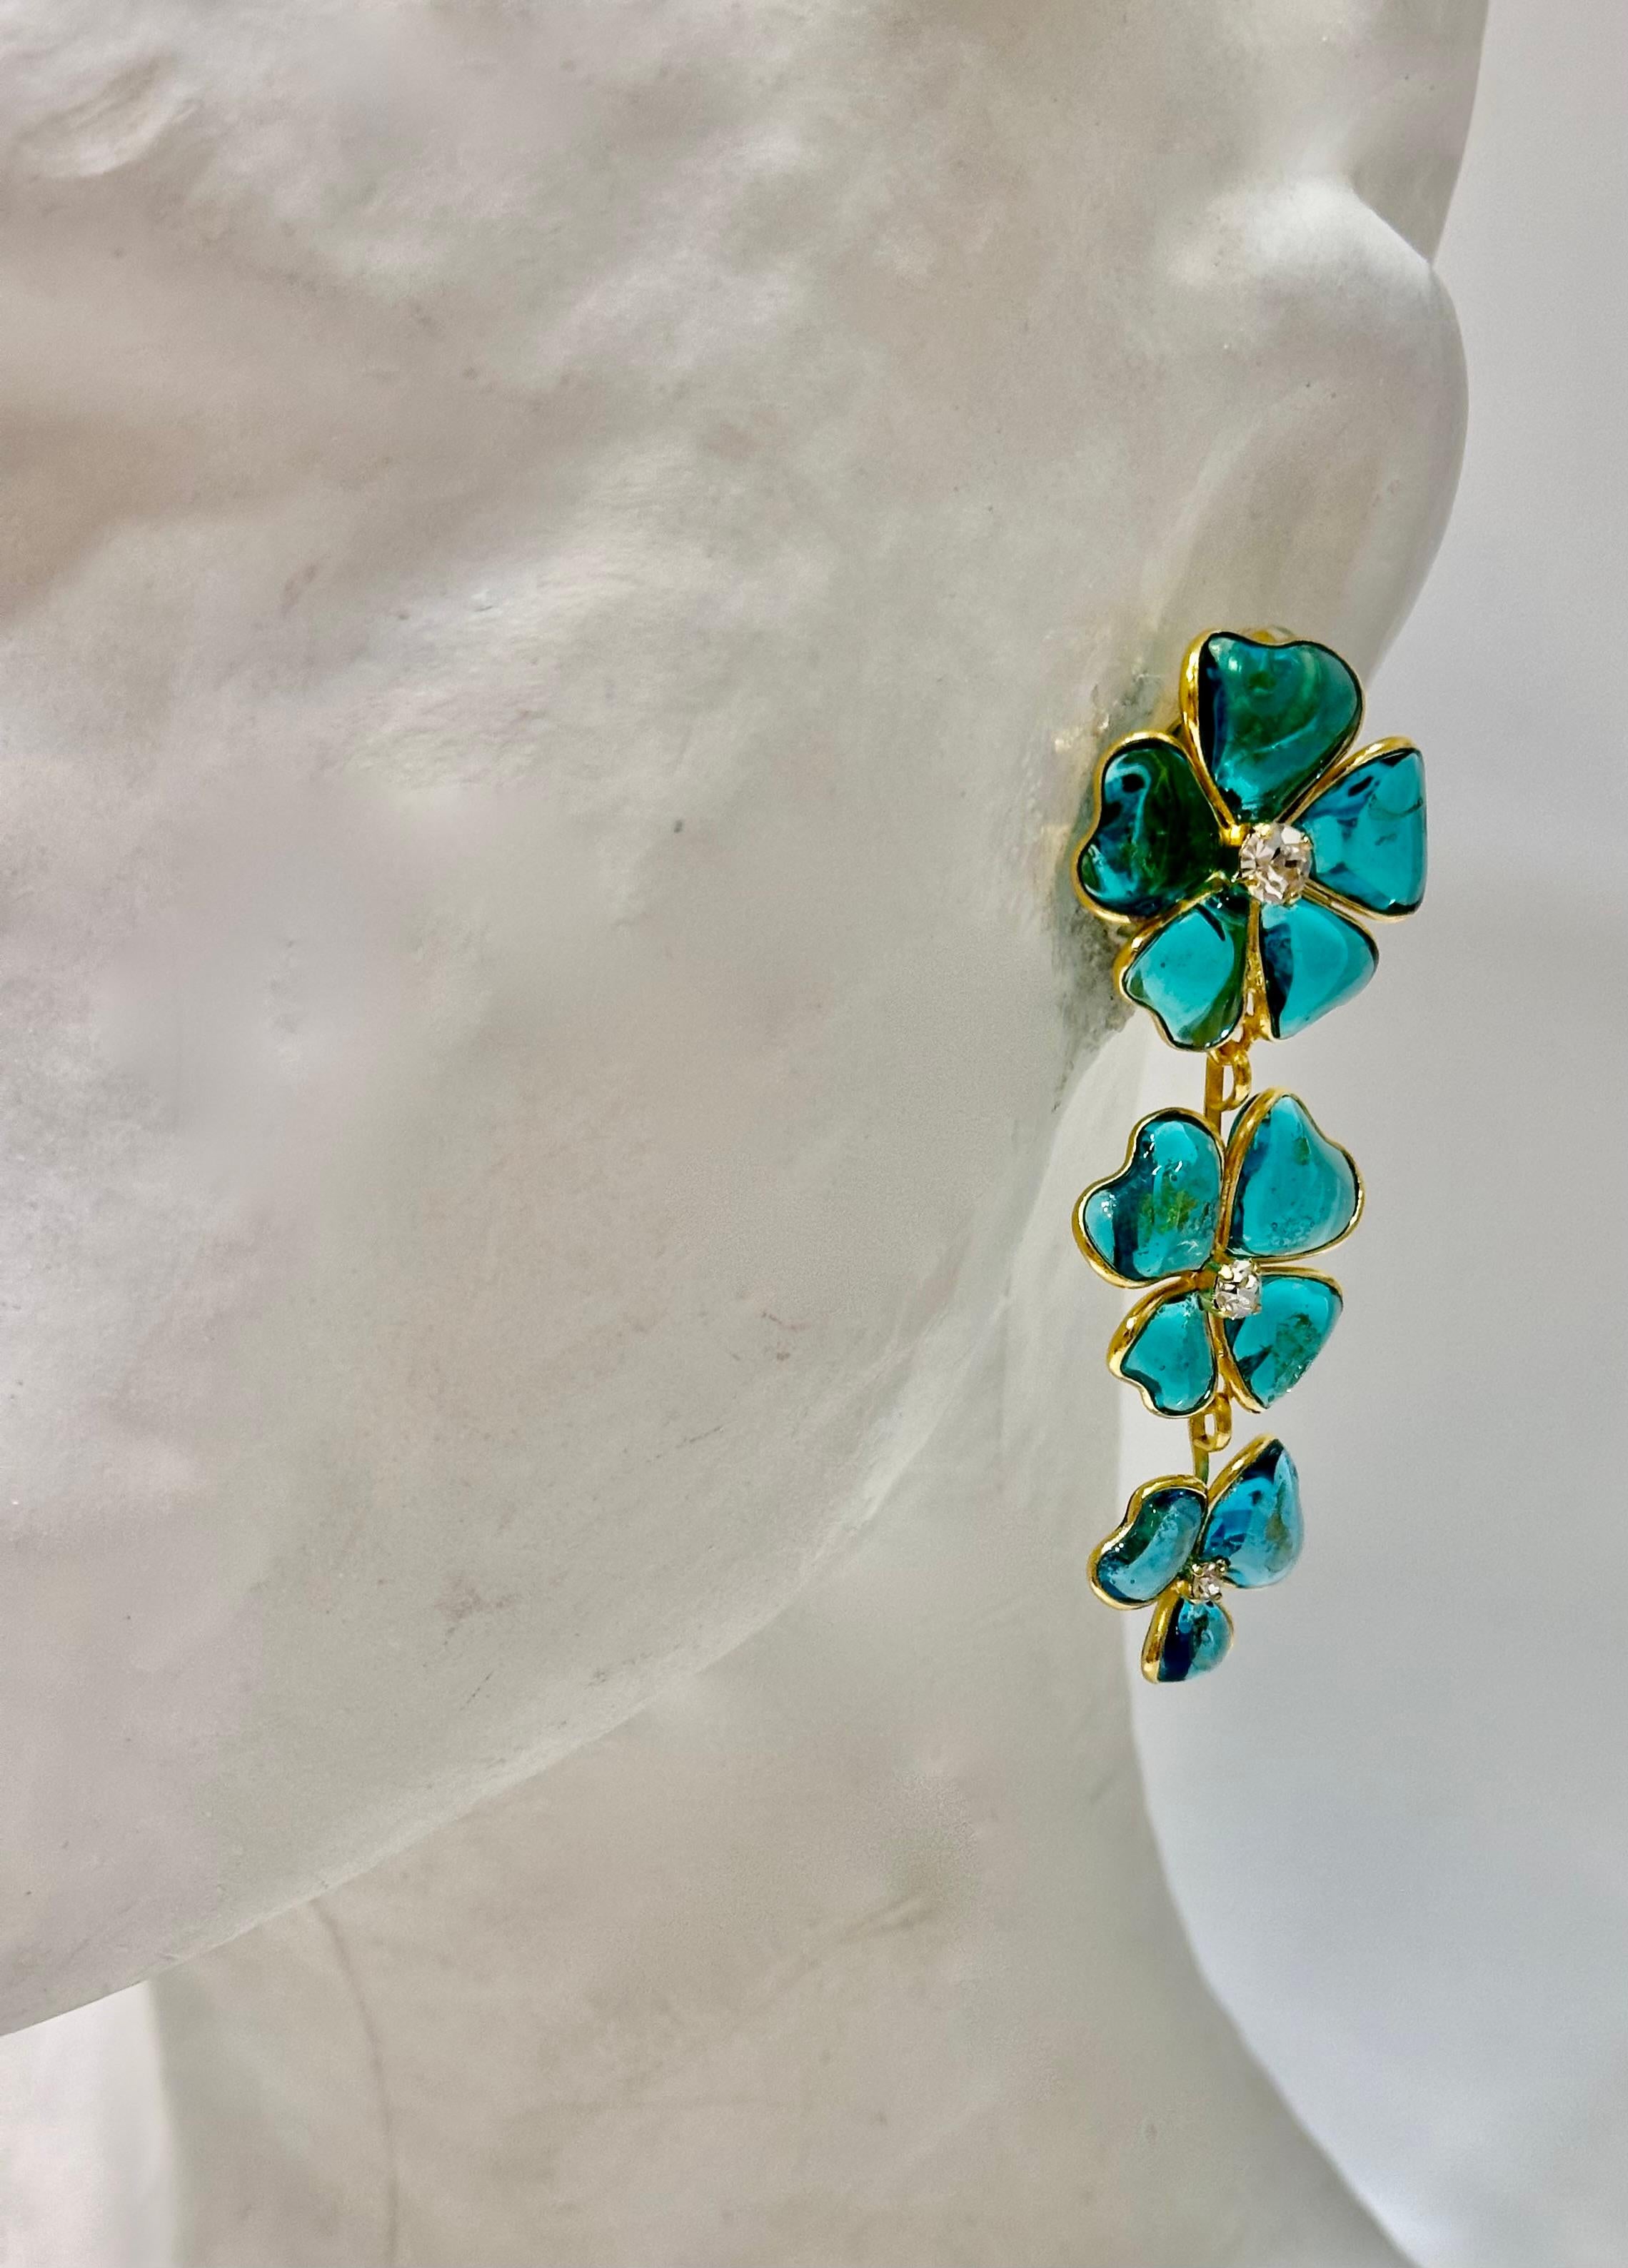 Masterfully crafted poured glass in dreamy hues of aqua green from Pate de Verre Collection.  Swarovski crystals.
Designed by a former artisan of the Atelier de GRIPOIX in the savoir faire used for all the Chanel pieces they executed.
This is a very